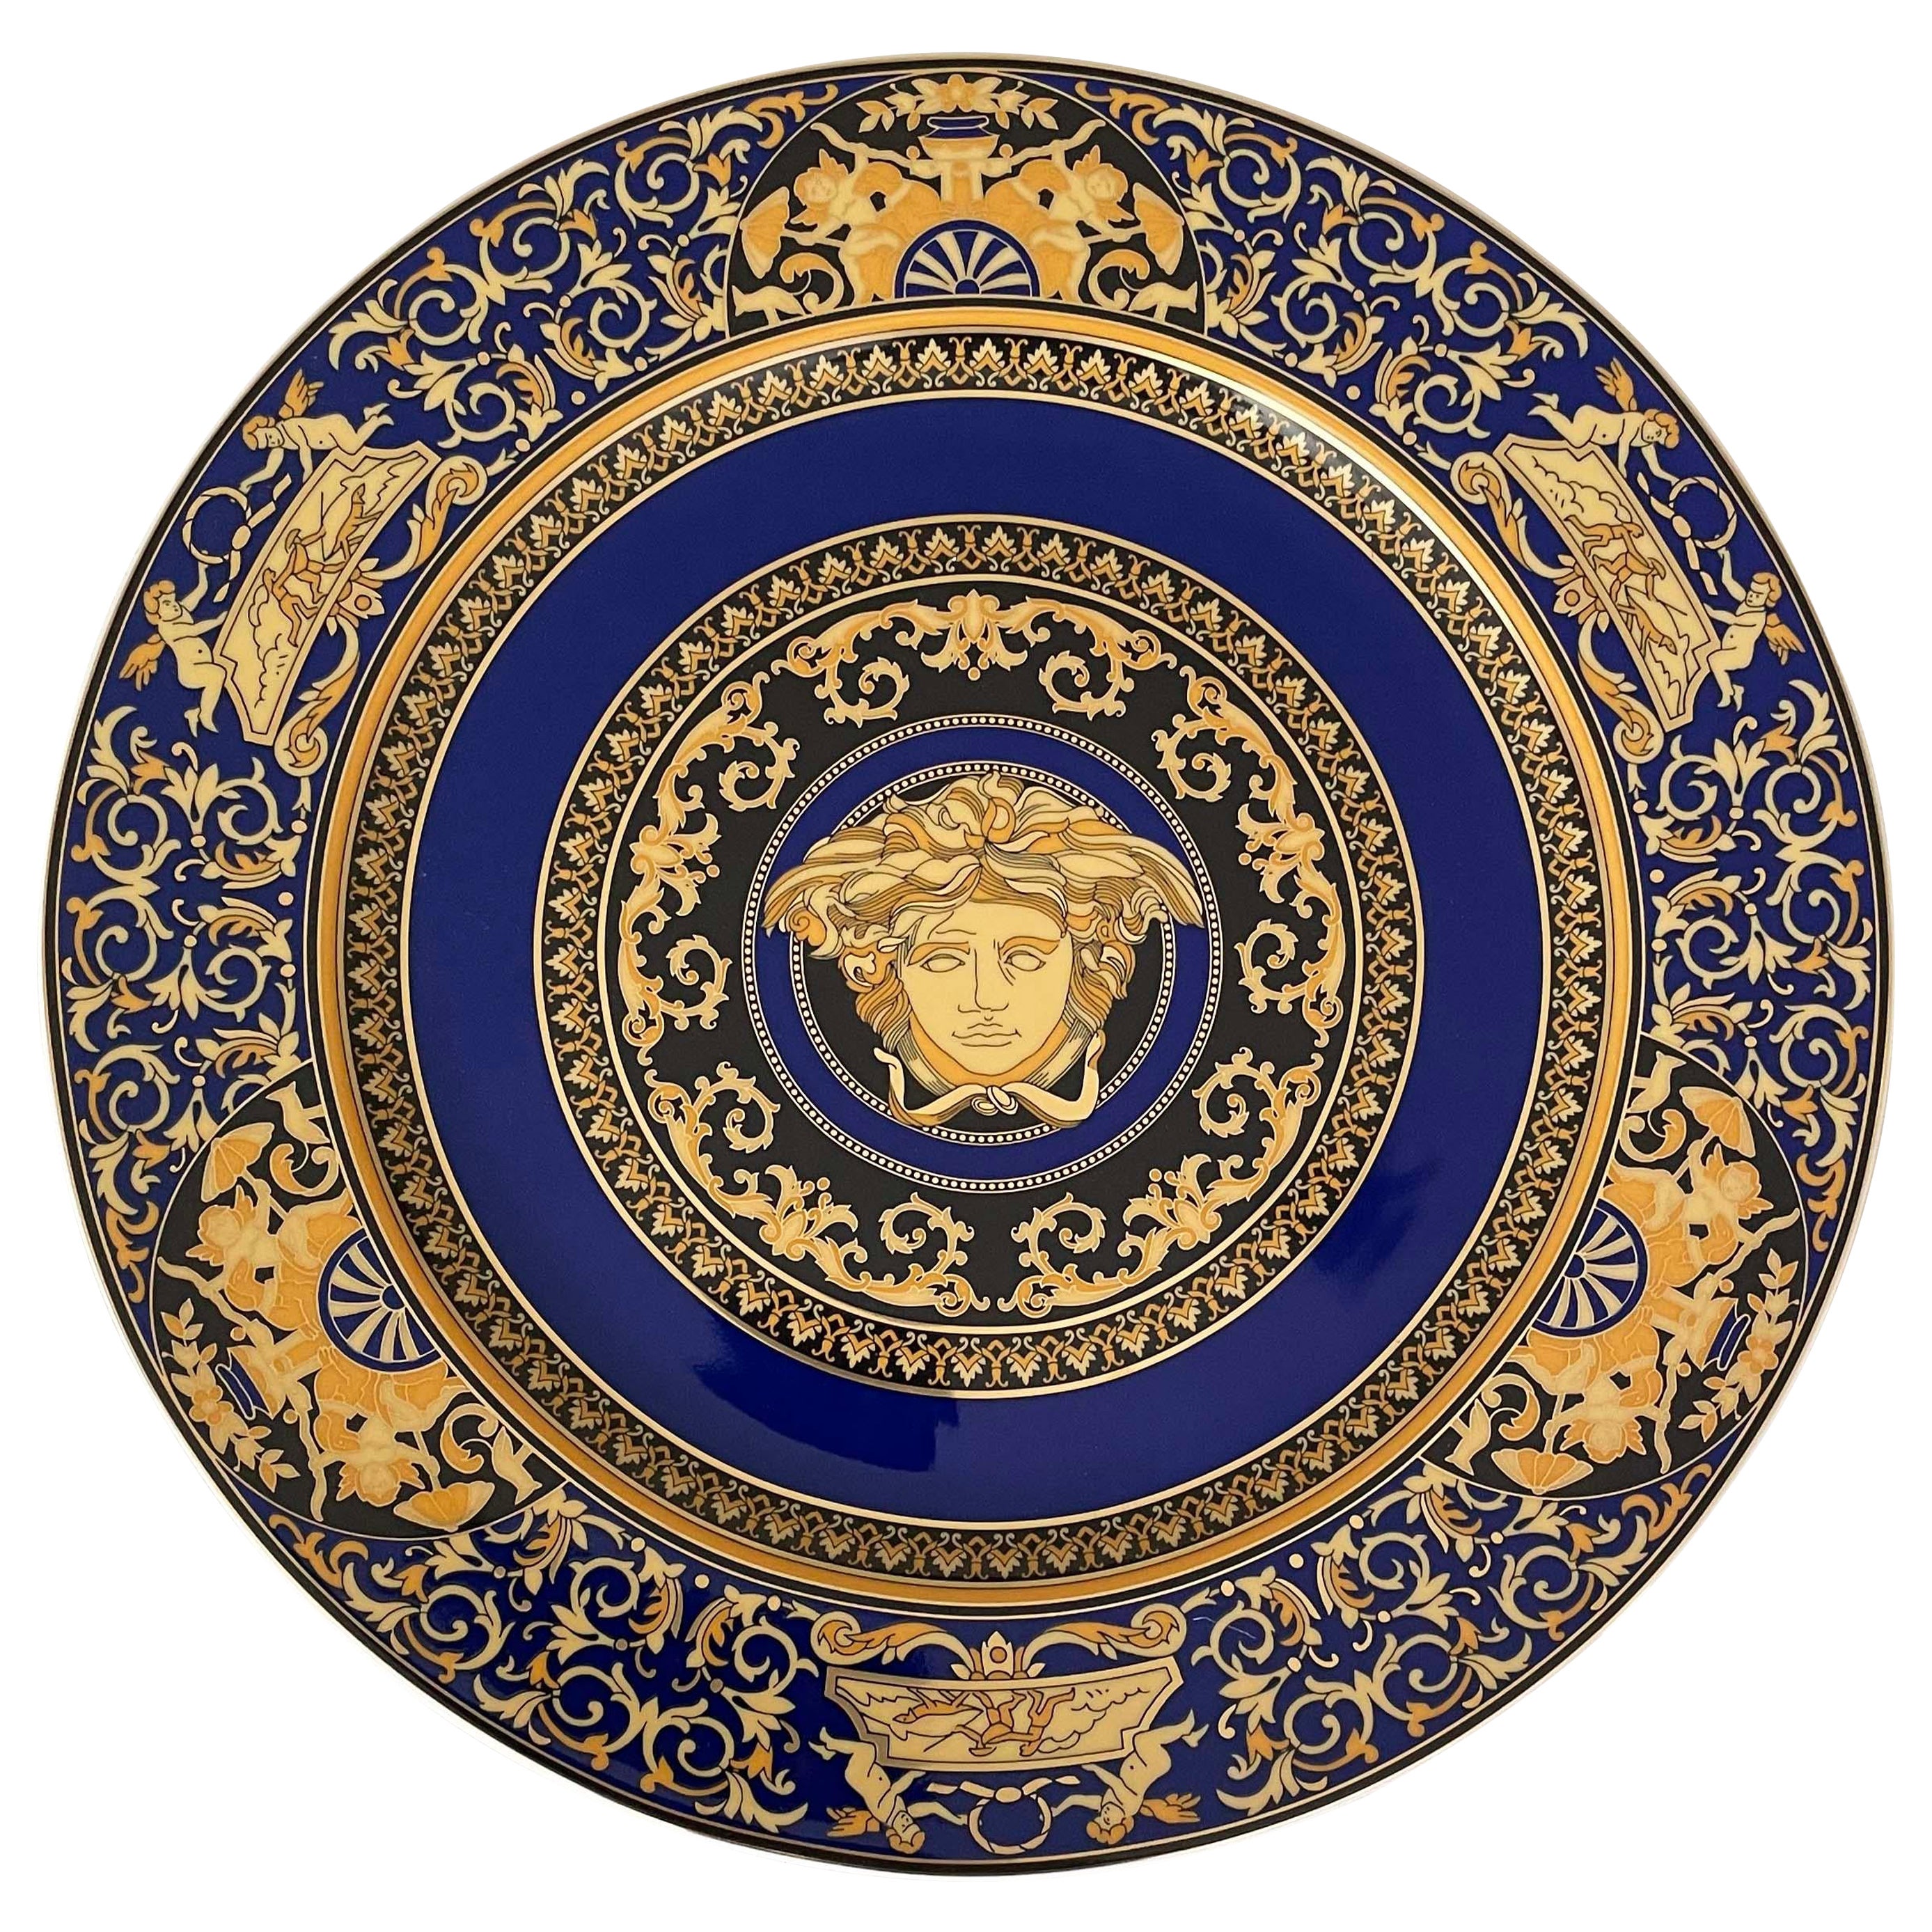  Versace Porcelain Medusa Display Plate By Rosenthal, 20th Century For Sale